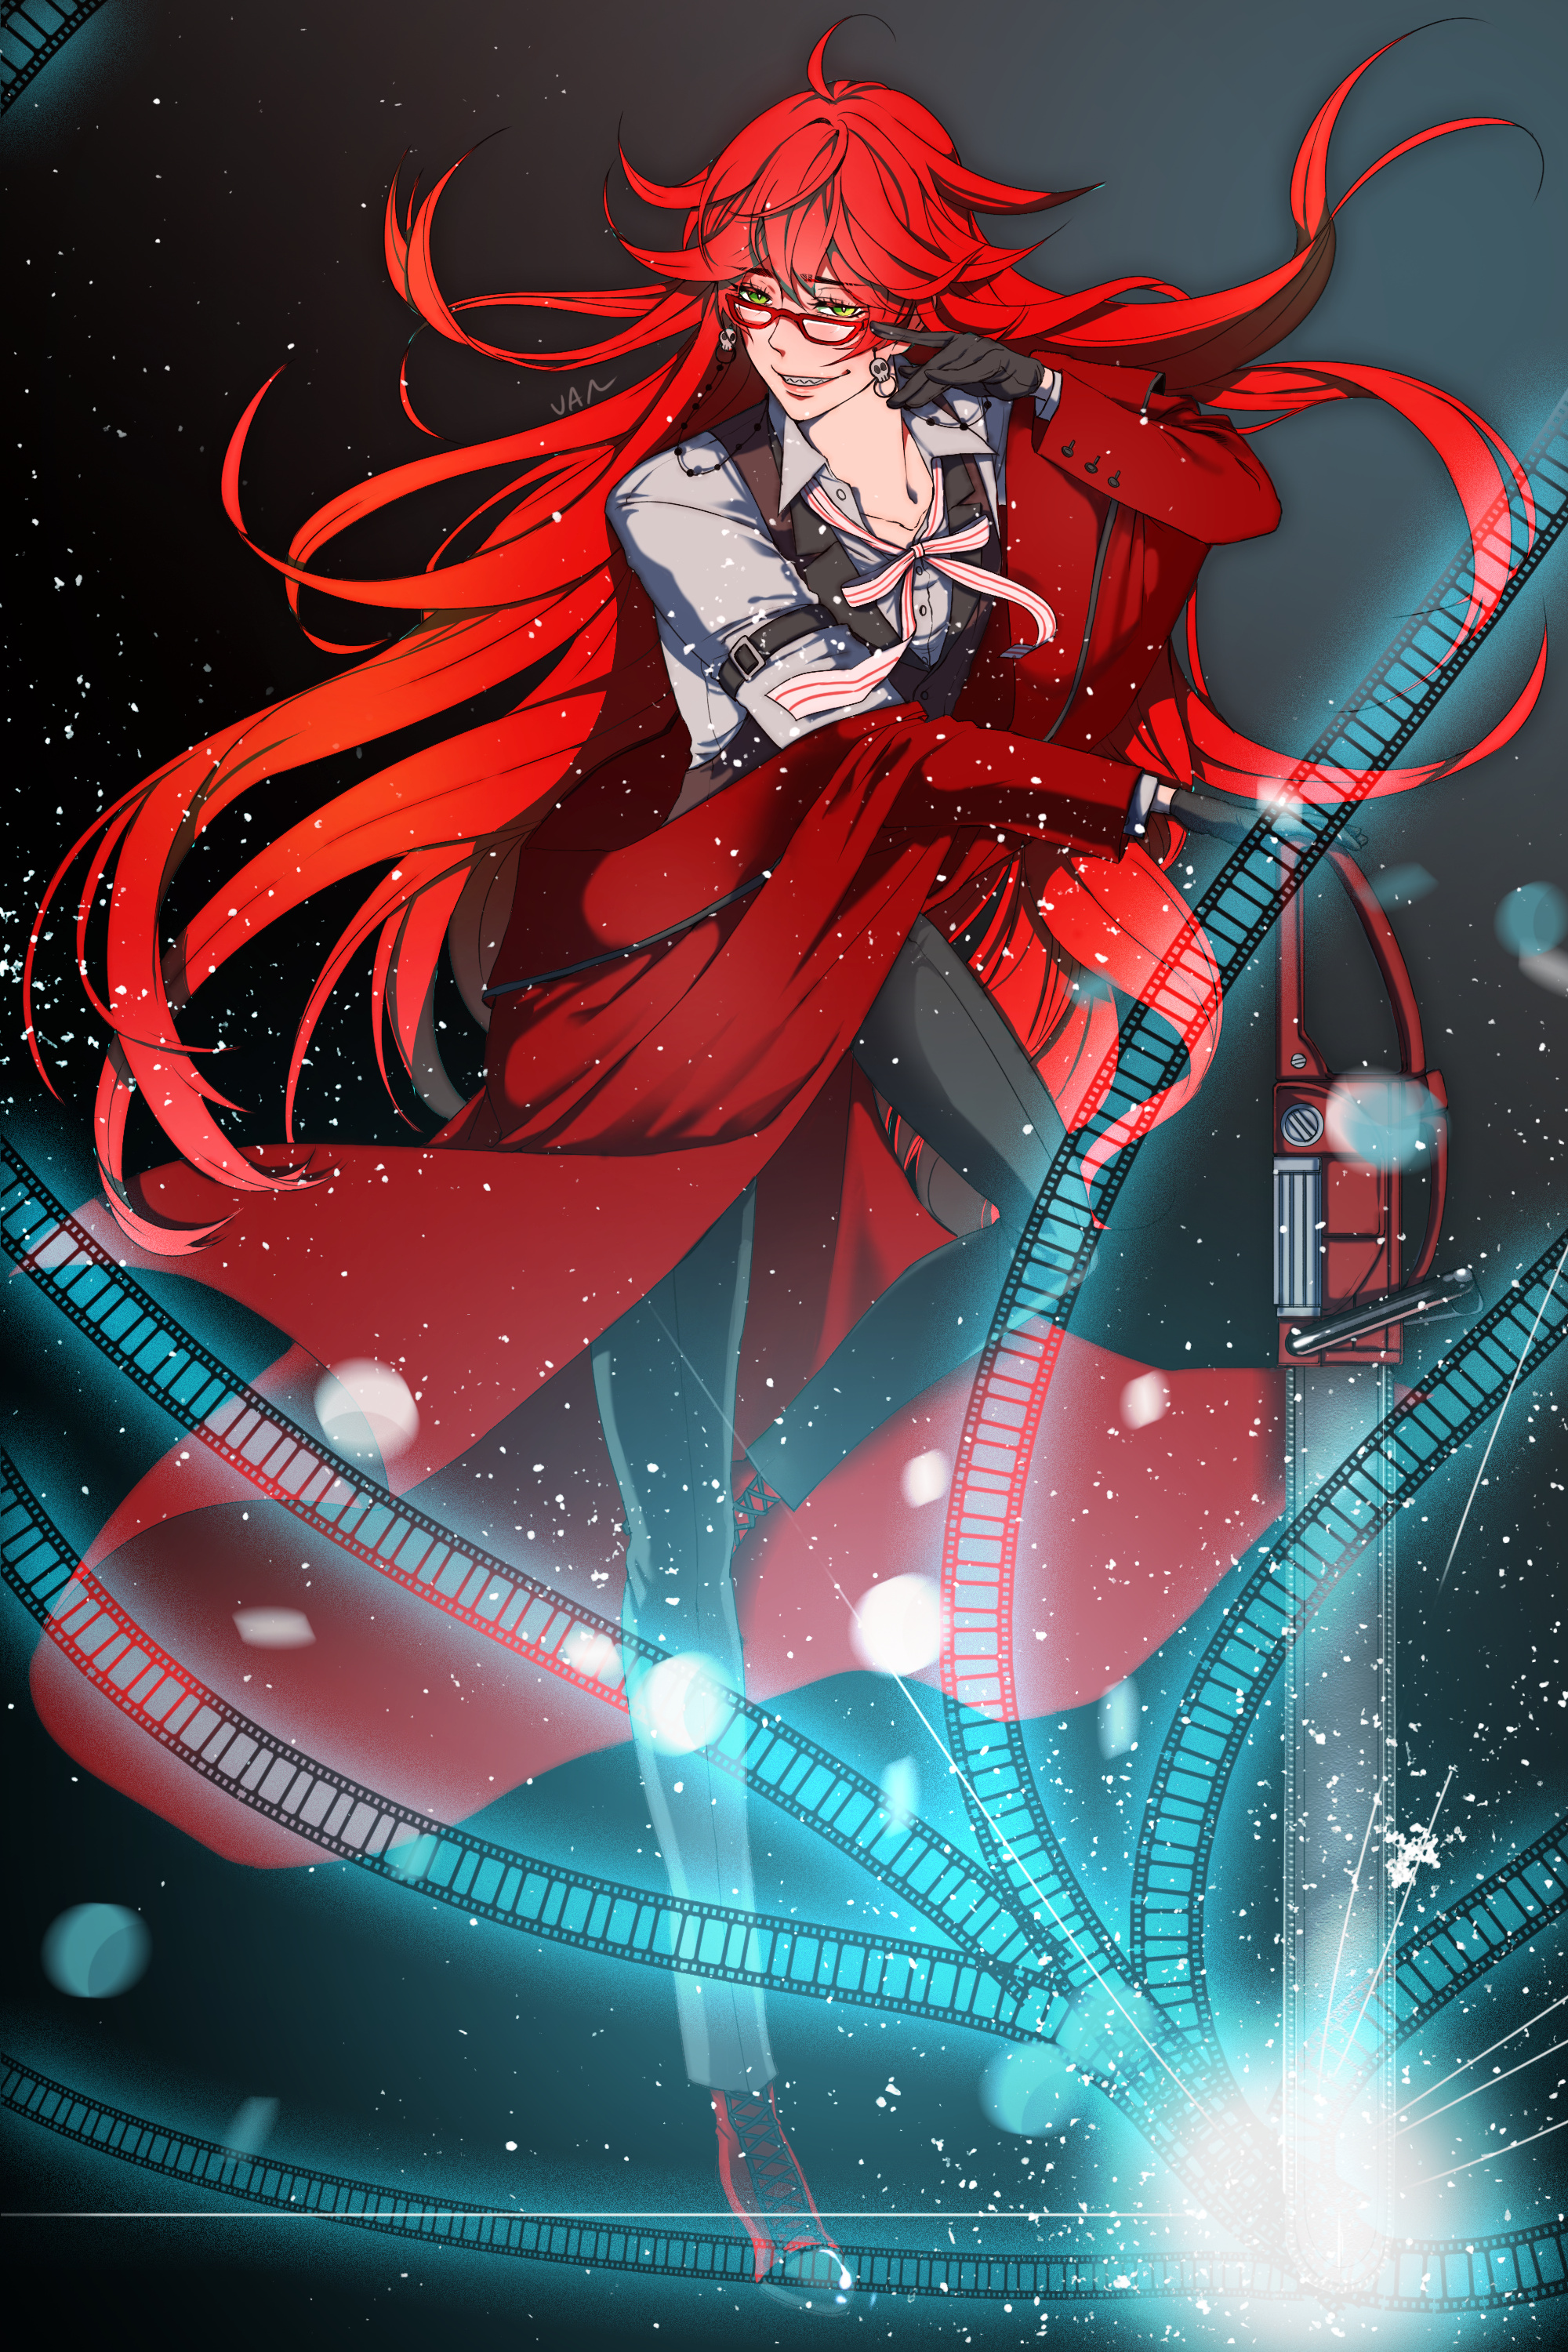 Grell Sutcliff: A two-part theatrical original video animation, titled Black Butler: Book of Murder. 2000x3000 HD Wallpaper.